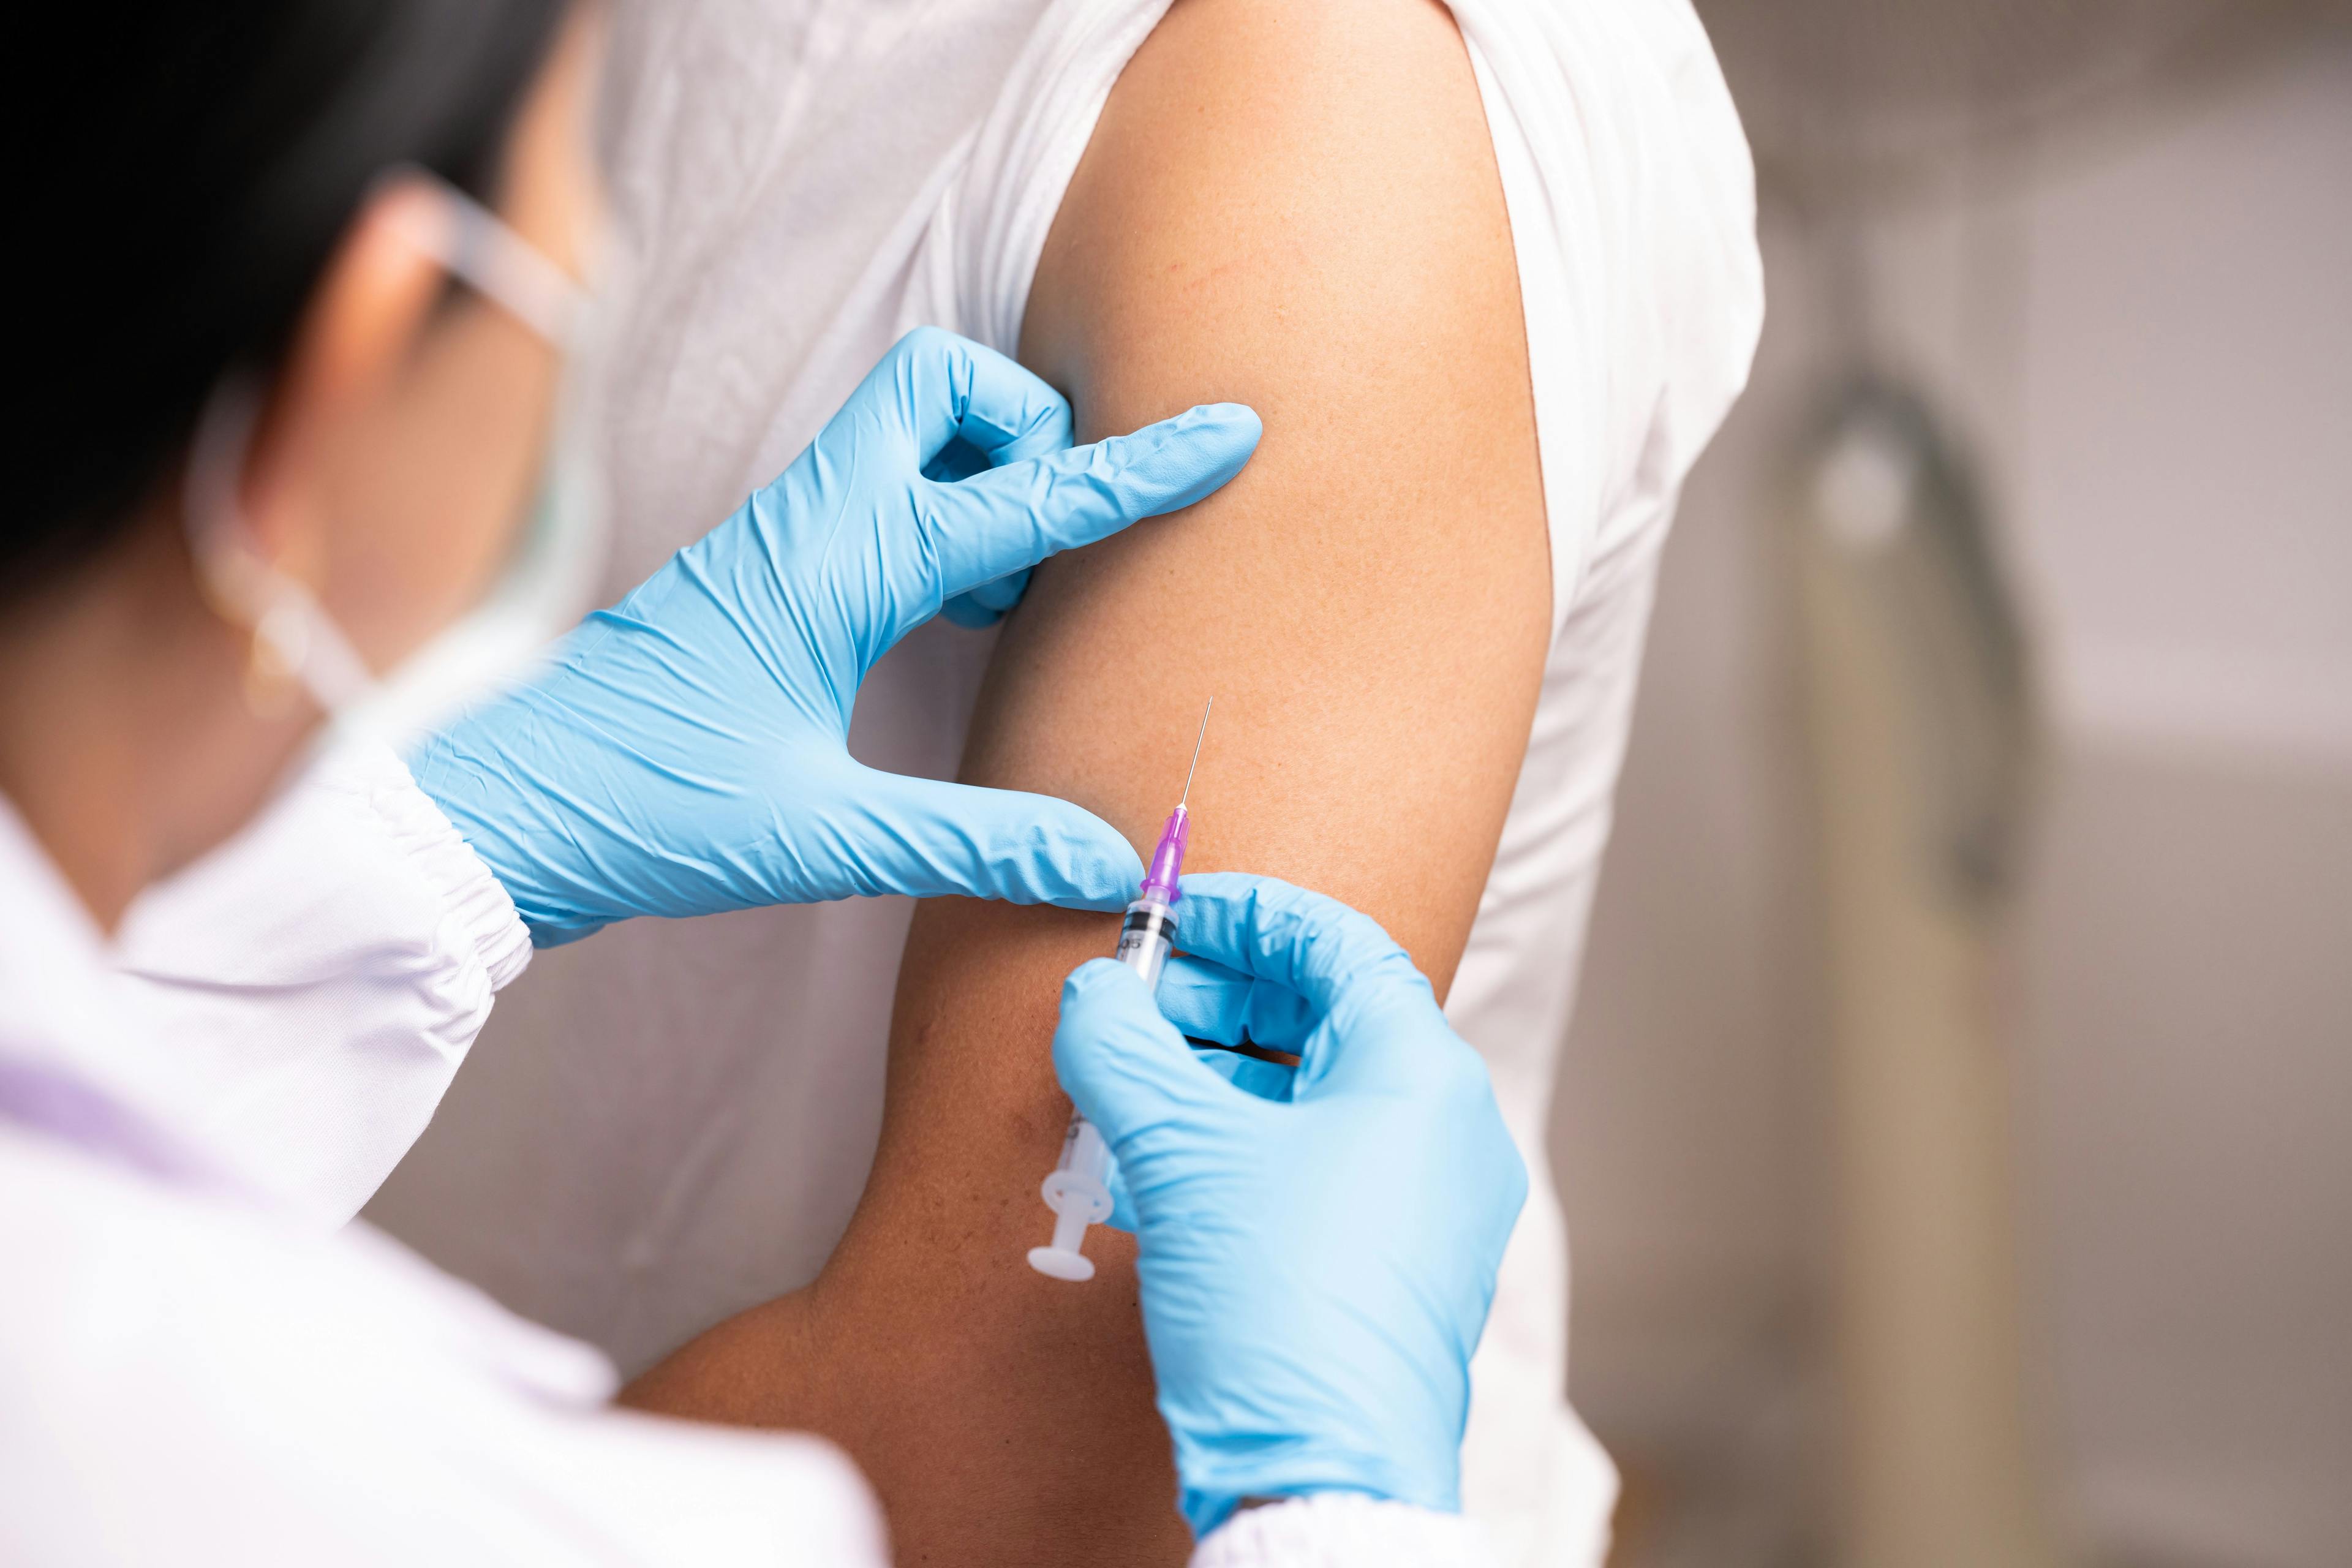 Health care worker giving patient an influenza vaccine